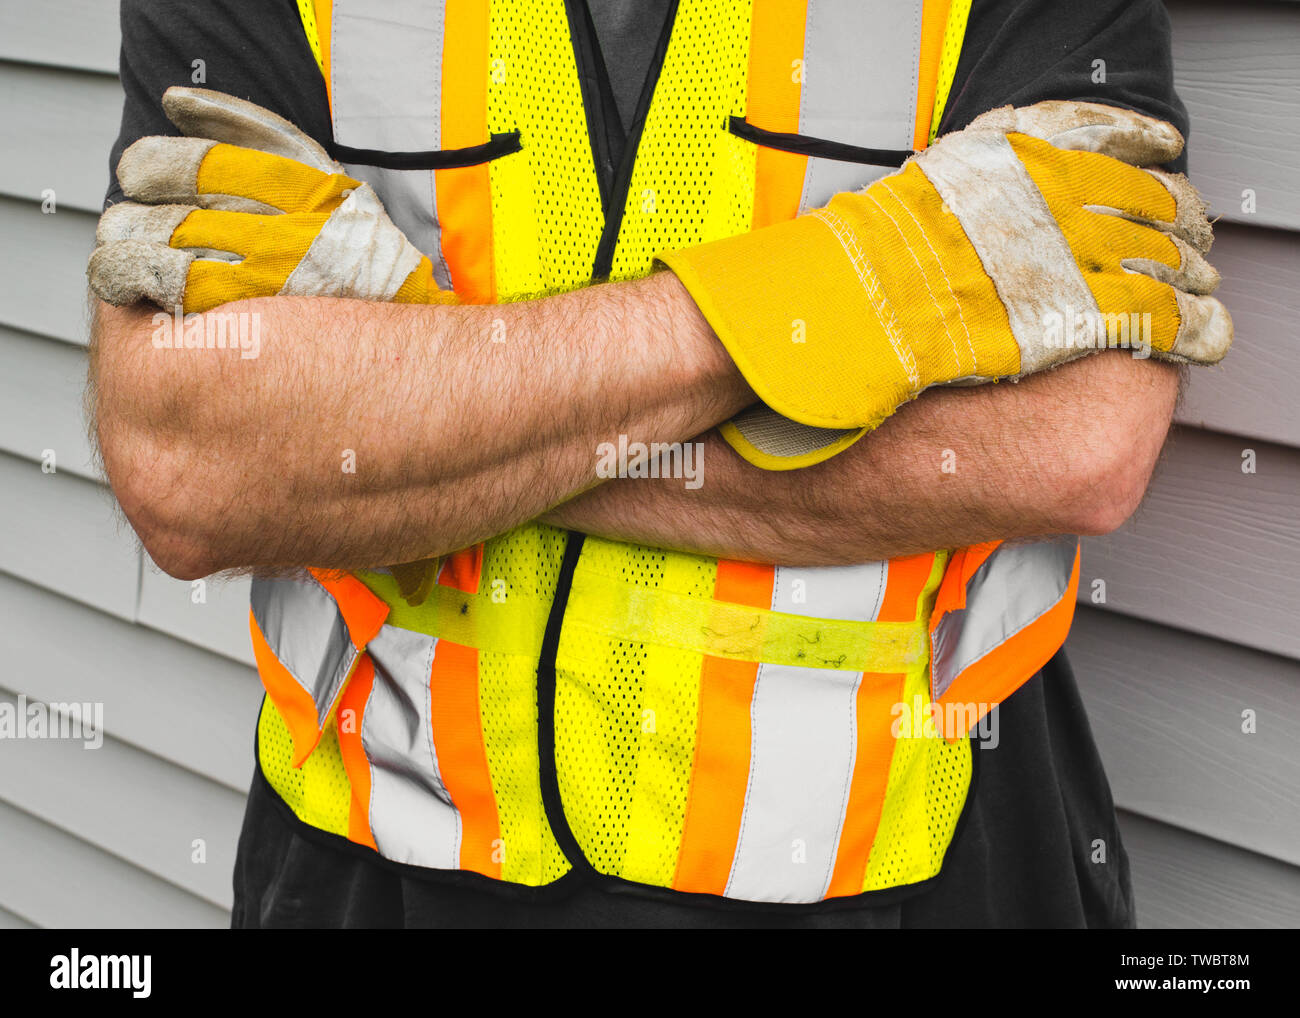 Man wearing safety vest and work gloves beside exterior siding. Stock Photo